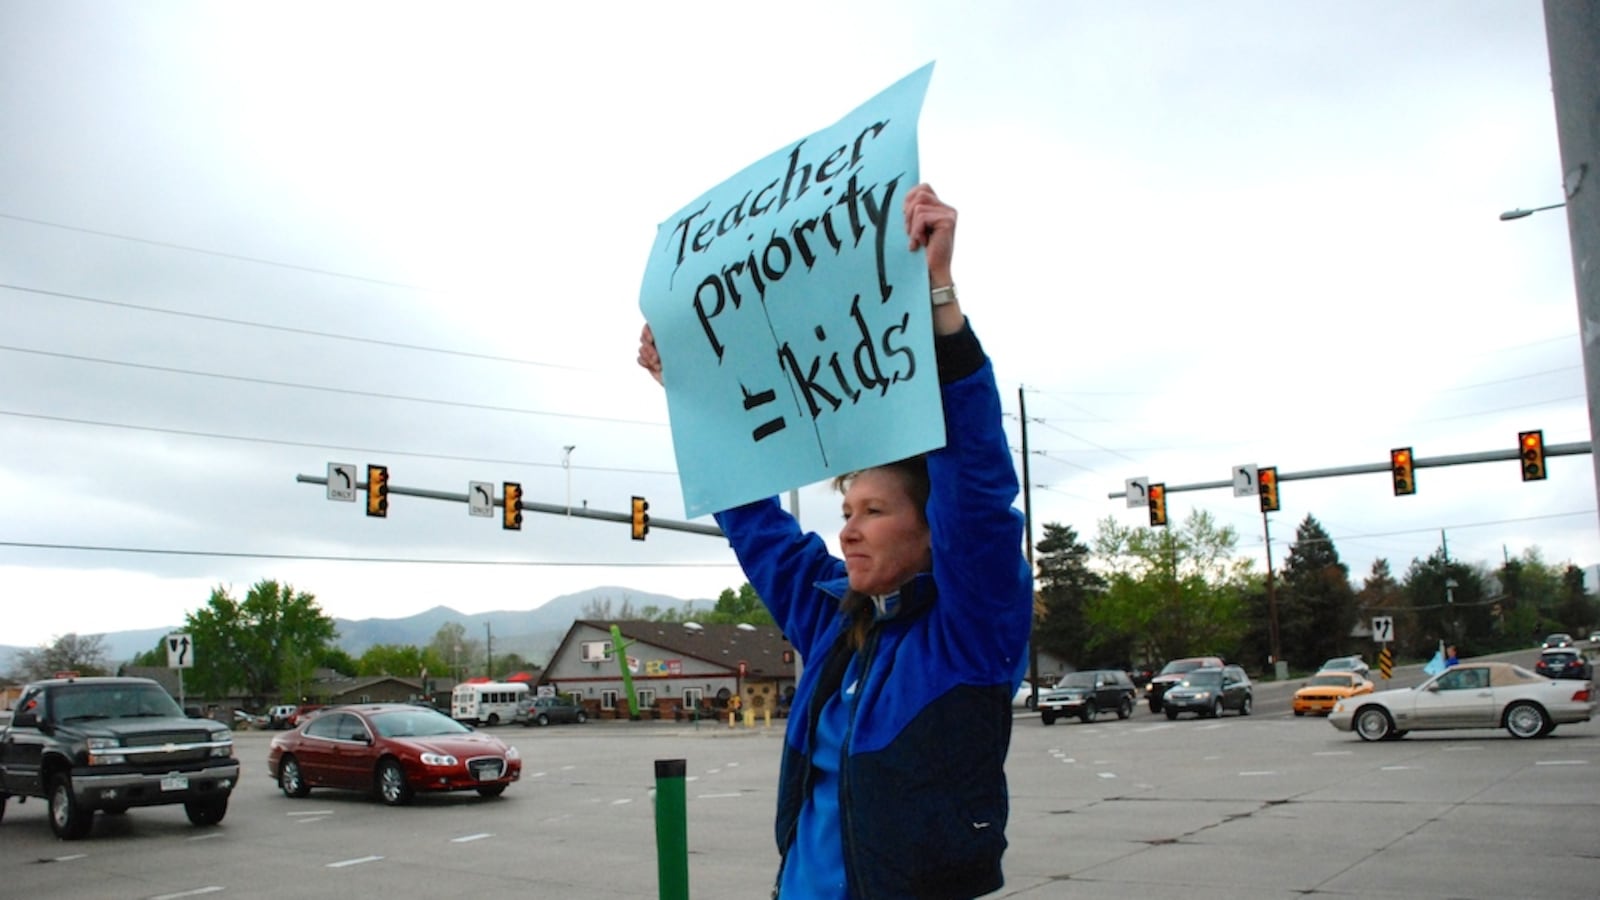 A Jeffco Public Schools teacher last spring rallied with hundreds of others along Wadsworth Boulevard against the district's board majority. The board majority Thursday night rejected a third party's recommendation to give pay raises to "partly effective" teachers.